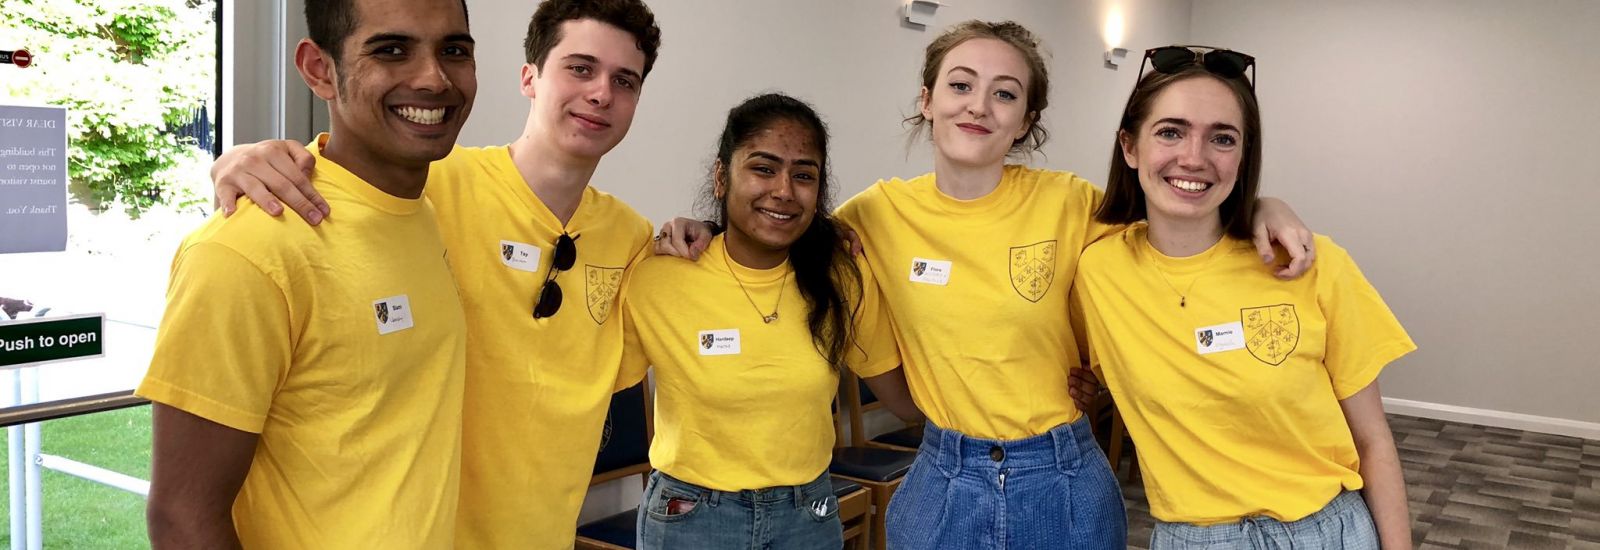 A group of five male and female students stand with their arms around each other in the Trinity College lawns pavilion during an open day. They are wearing matching bright yellow t-shirts.